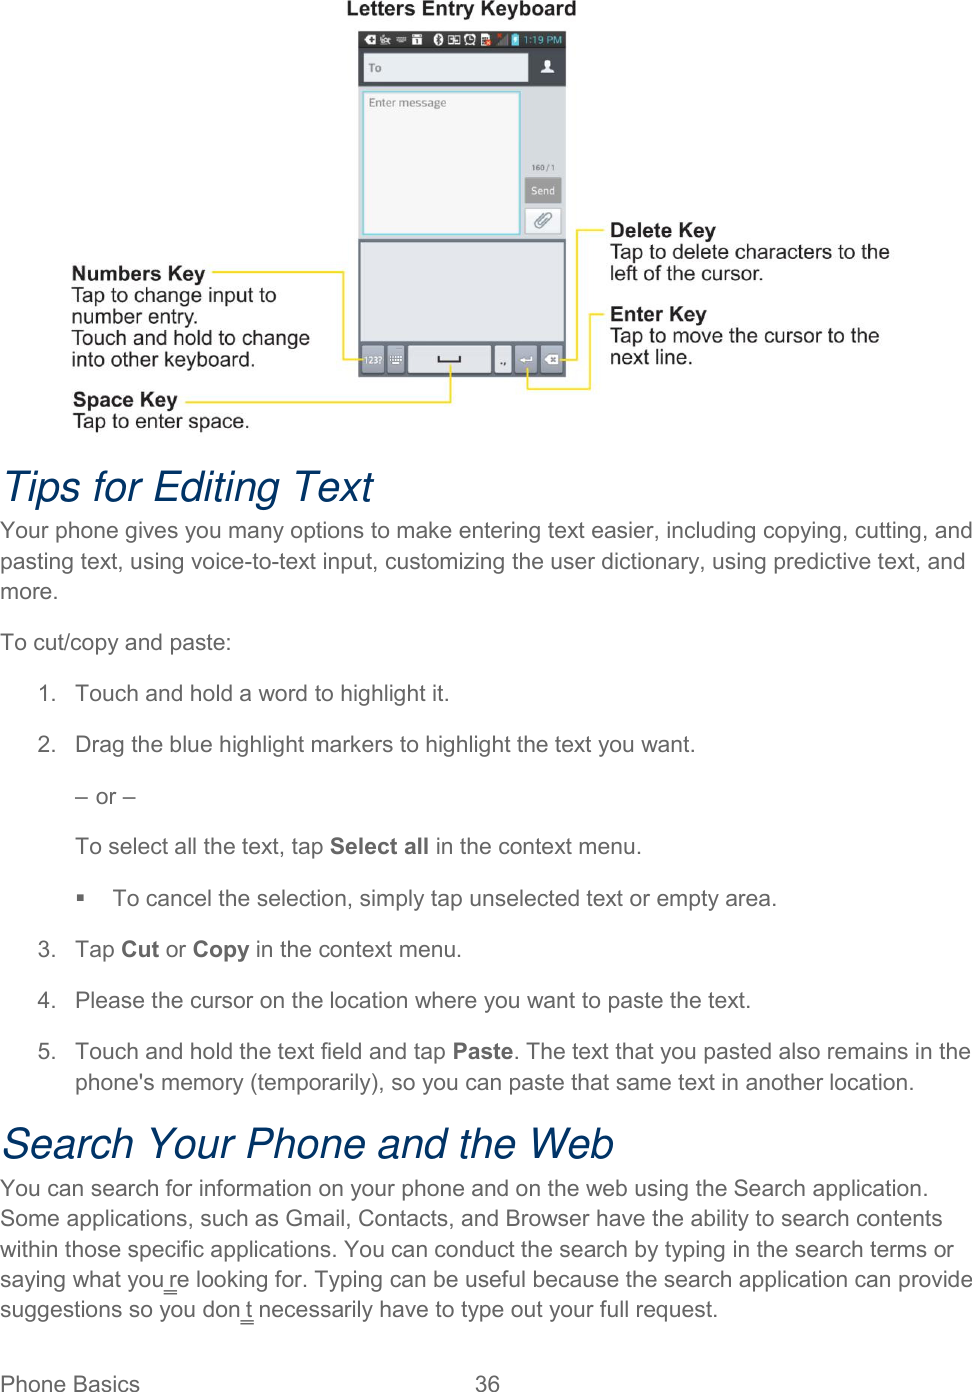  Phone Basics  36    Tips for Editing Text Your phone gives you many options to make entering text easier, including copying, cutting, and pasting text, using voice-to-text input, customizing the user dictionary, using predictive text, and more.  To cut/copy and paste:  1.  Touch and hold a word to highlight it.  2.  Drag the blue highlight markers to highlight the text you want.  – or –  To select all the text, tap Select all in the context menu.    To cancel the selection, simply tap unselected text or empty area.  3.  Tap Cut or Copy in the context menu.  4.  Please the cursor on the location where you want to paste the text.  5.  Touch and hold the text field and tap Paste. The text that you pasted also remains in the phone&apos;s memory (temporarily), so you can paste that same text in another location.  Search Your Phone and the Web  You can search for information on your phone and on the web using the Search application. Some applications, such as Gmail, Contacts, and Browser have the ability to search contents within those specific applications. You can conduct the search by typing in the search terms or saying what you‗re looking for. Typing can be useful because the search application can provide suggestions so you don‗t necessarily have to type out your full request. 